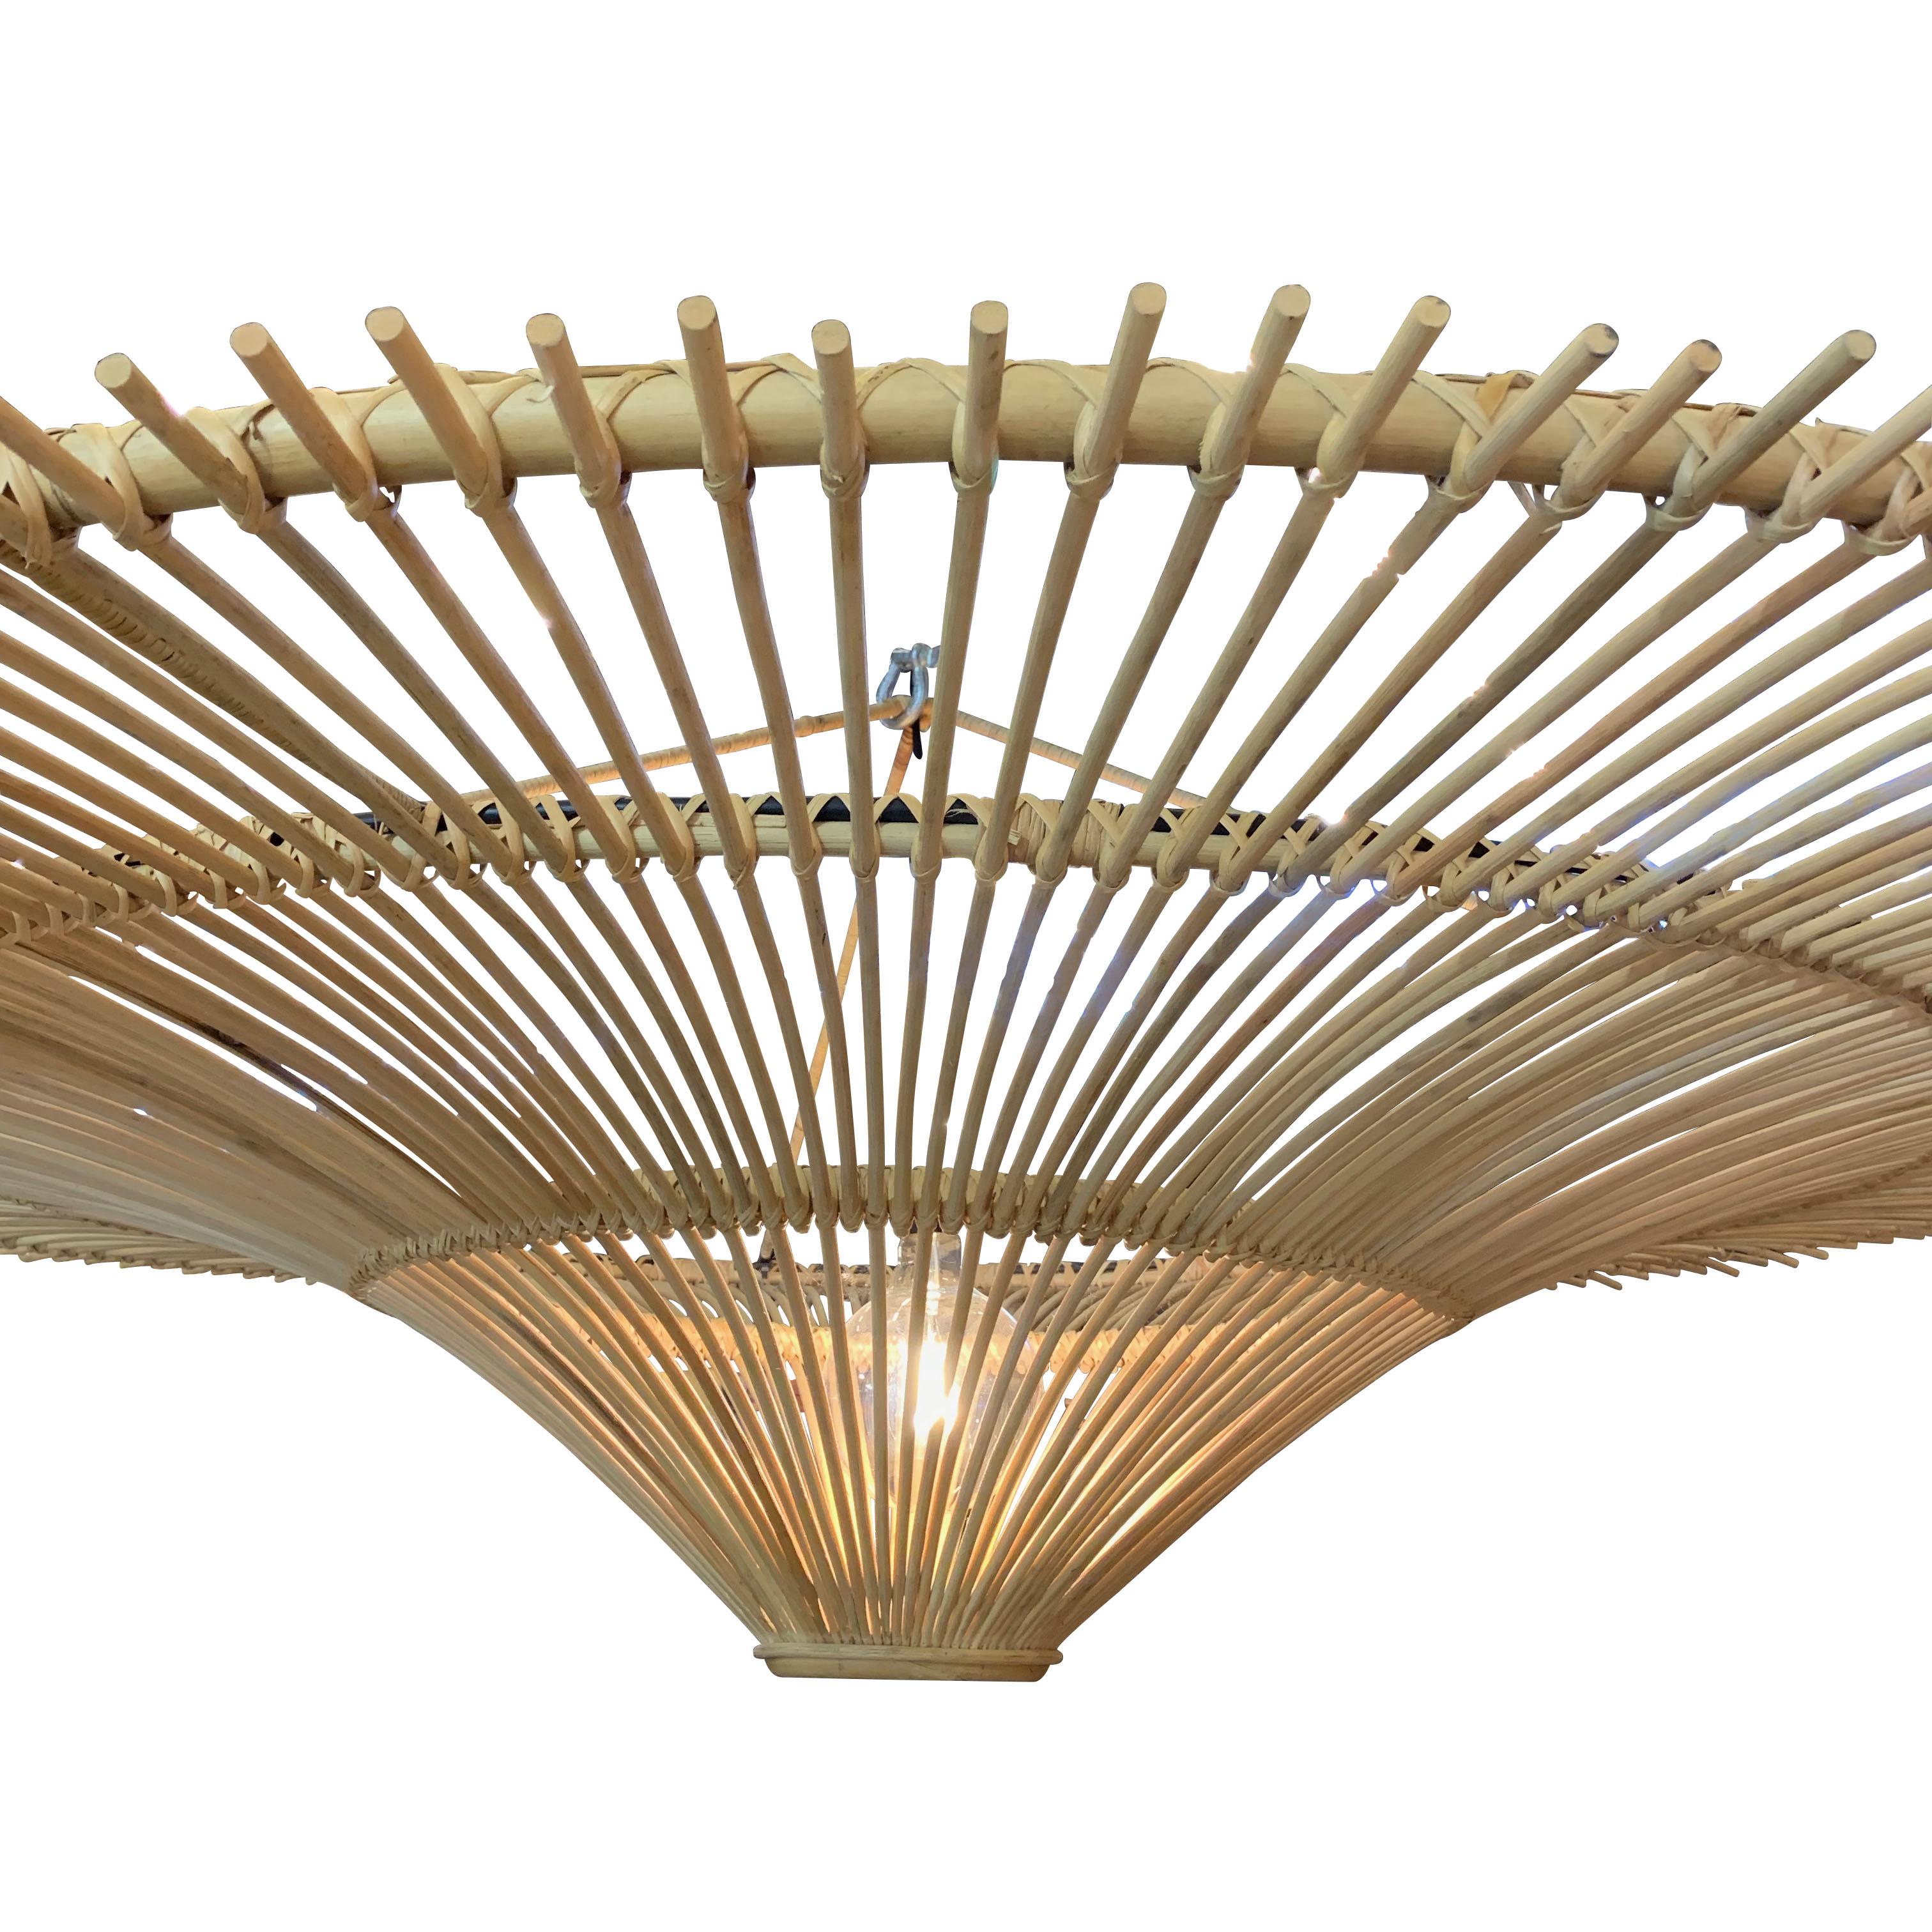 Contemporary Indonesian medium size round umbrella shaped chandelier made of bamboo.
Single bulb.
60watt to 100 watt maximum
ARRIVING SEPTEMBER
Also available in large 71